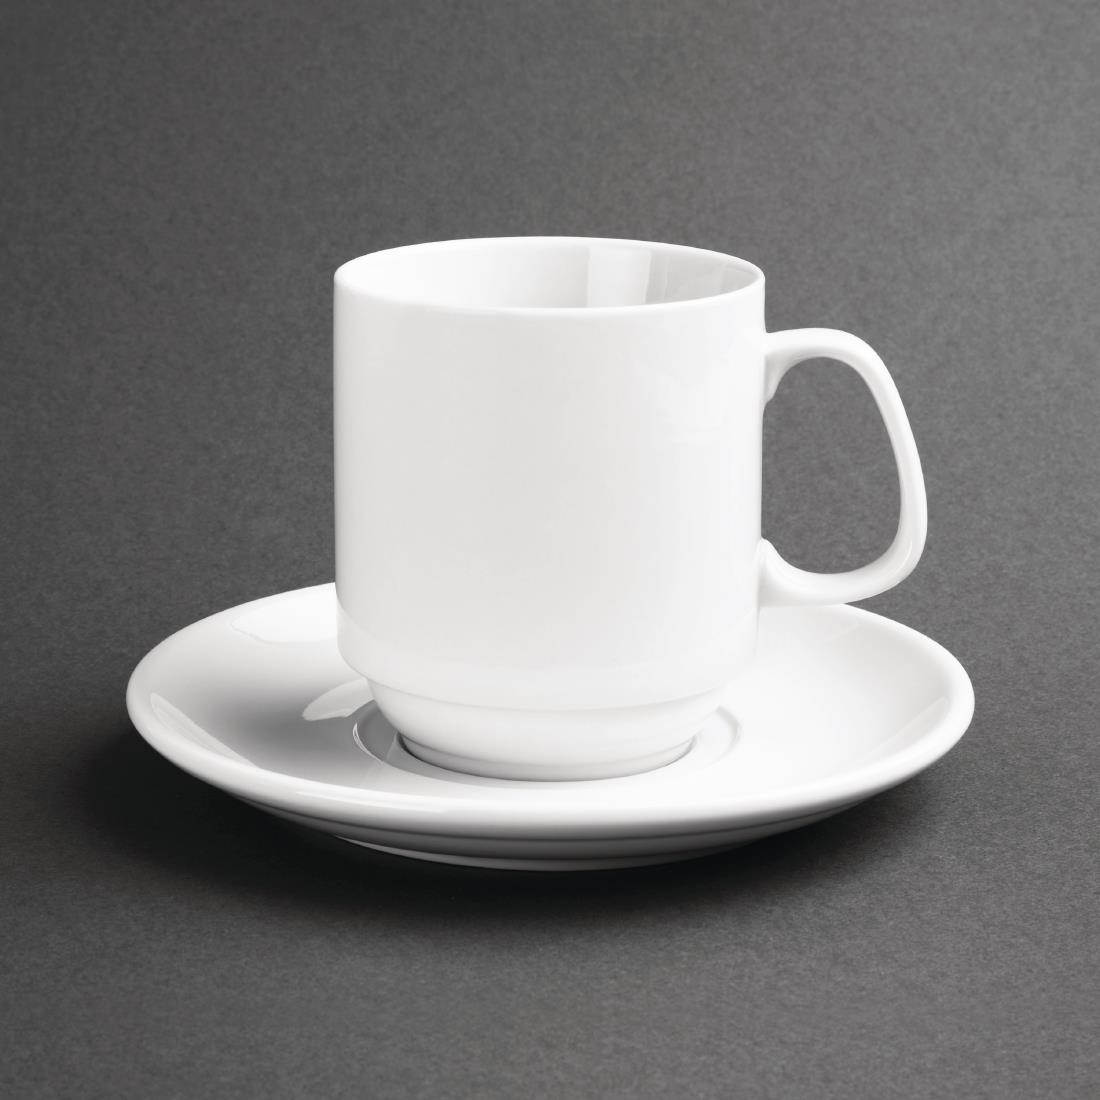 Olympia Heritage Double Well Saucers 163mm White (Pack of 6) - DW157  - 3